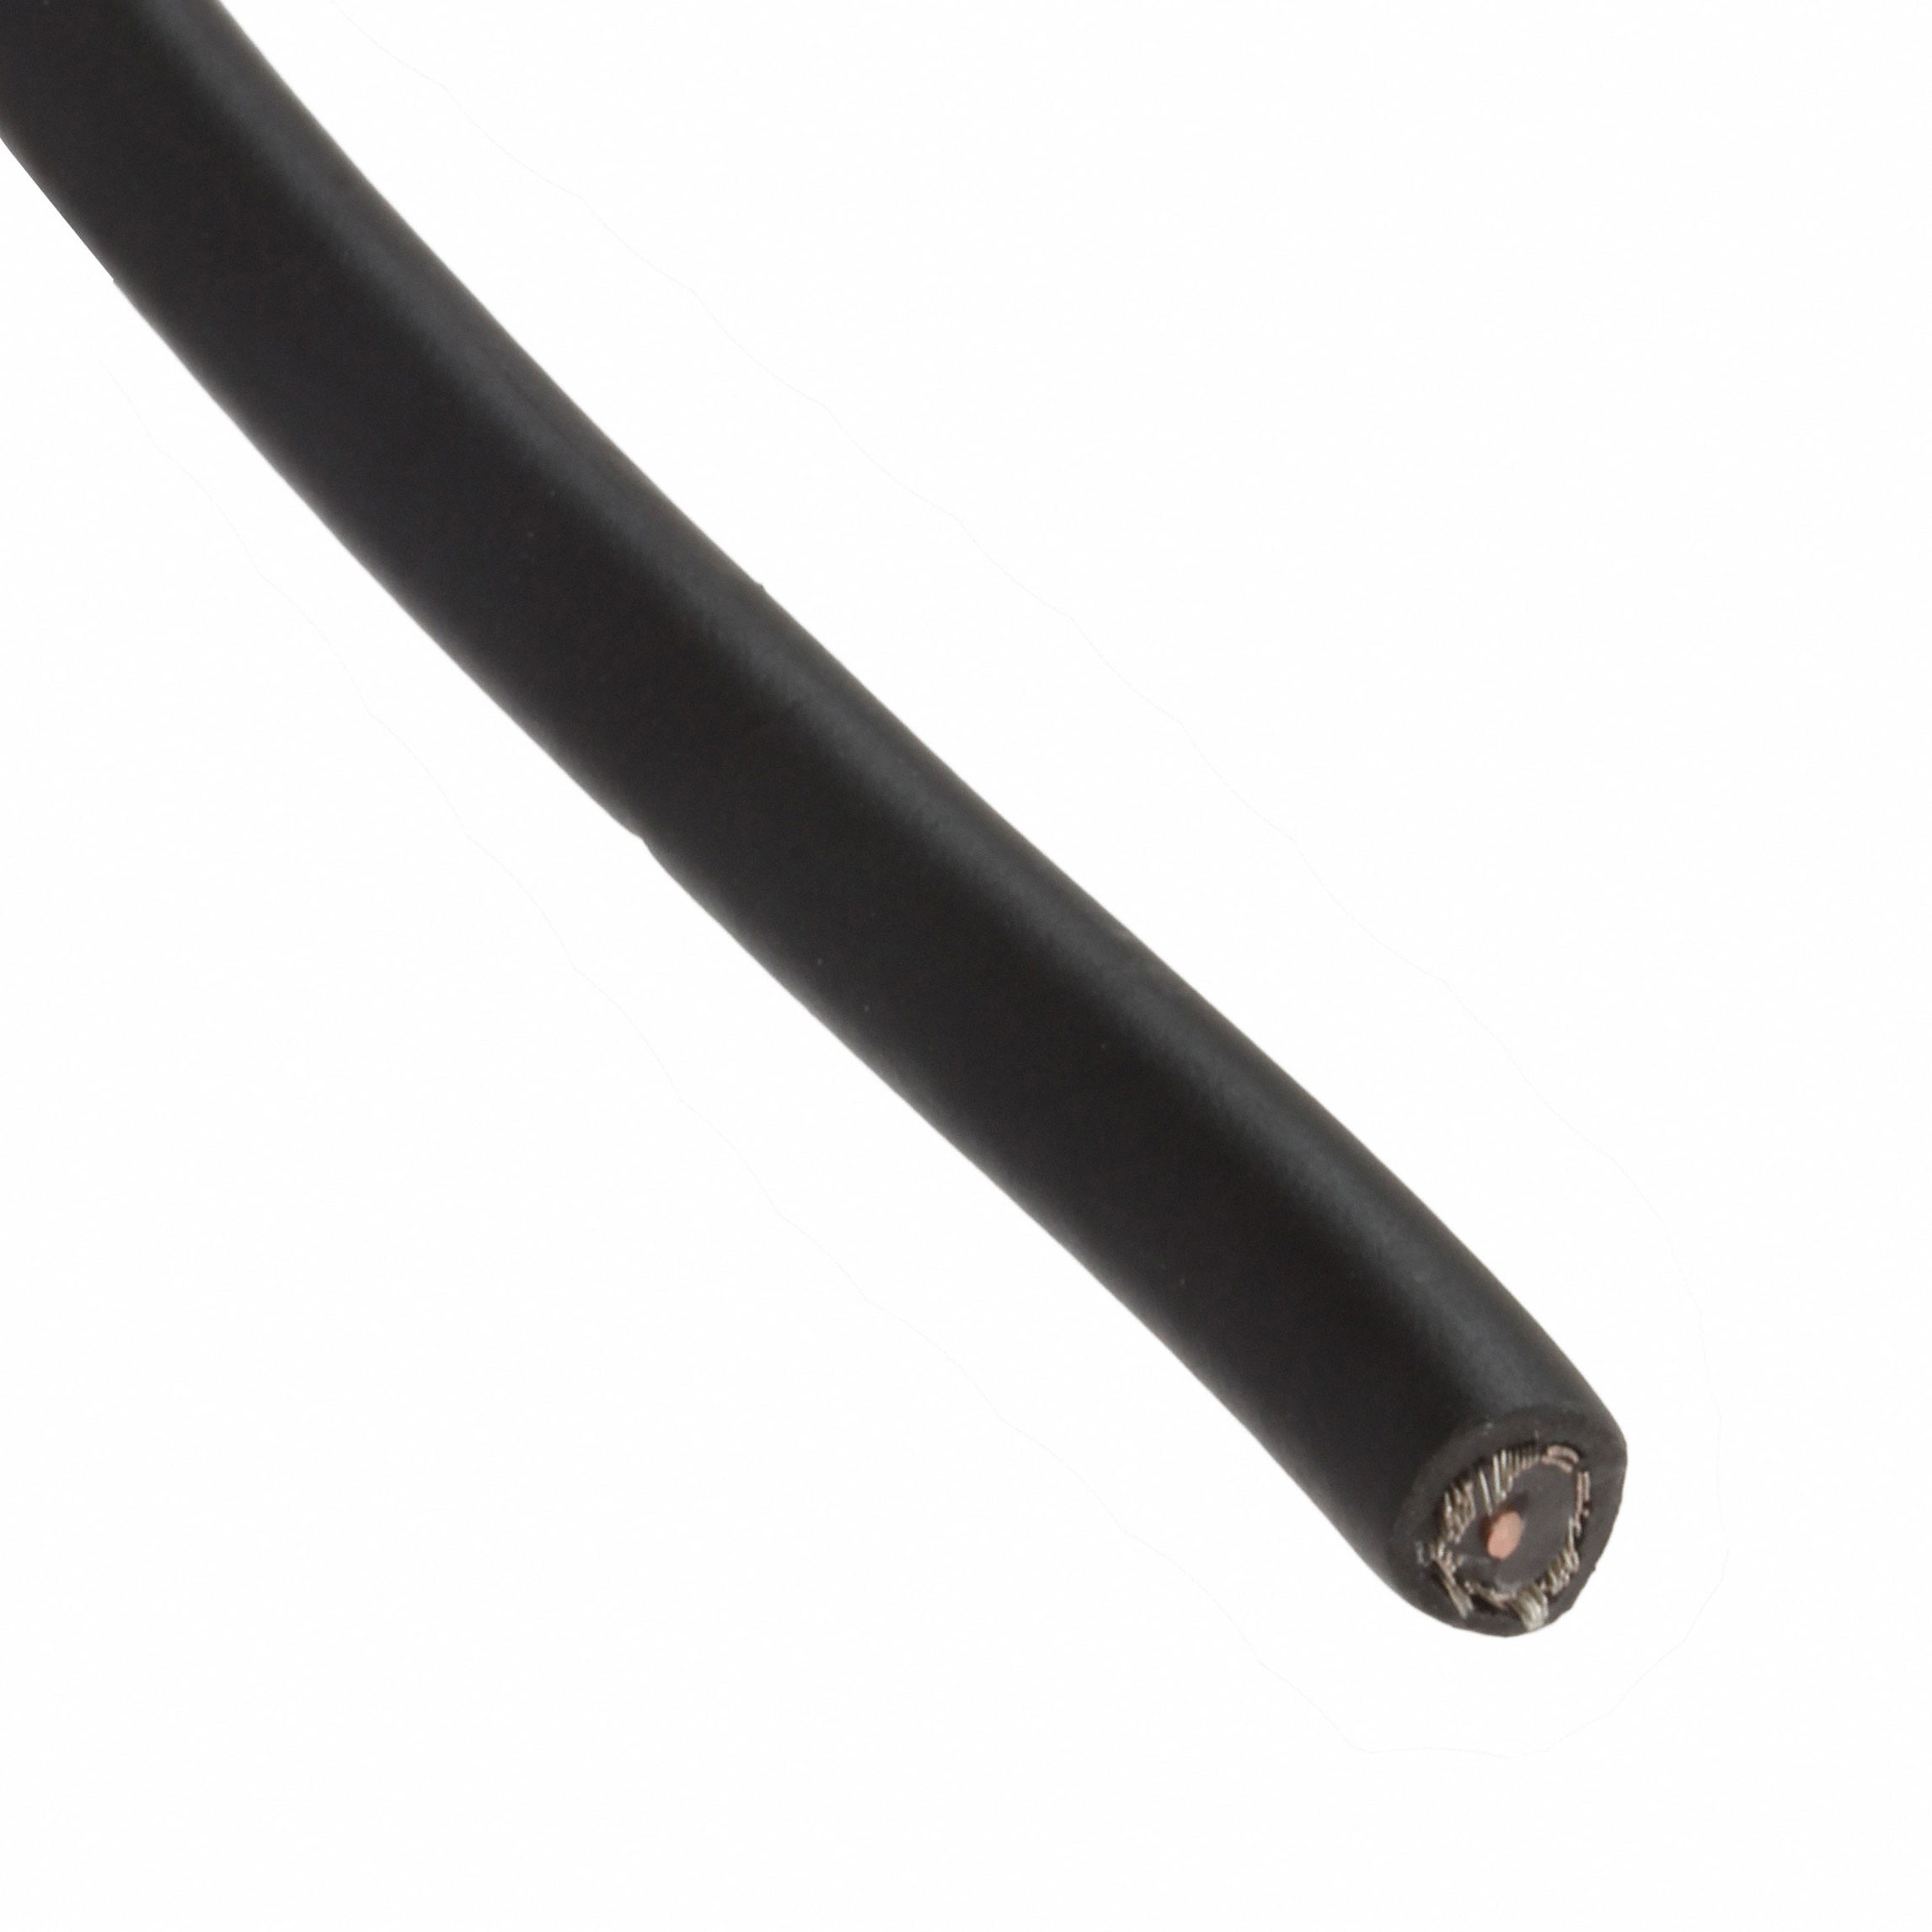 Coaxial Cable 20 AWG (0.52mm2) RG-58 100.0' (30.48m) 50 Ohms